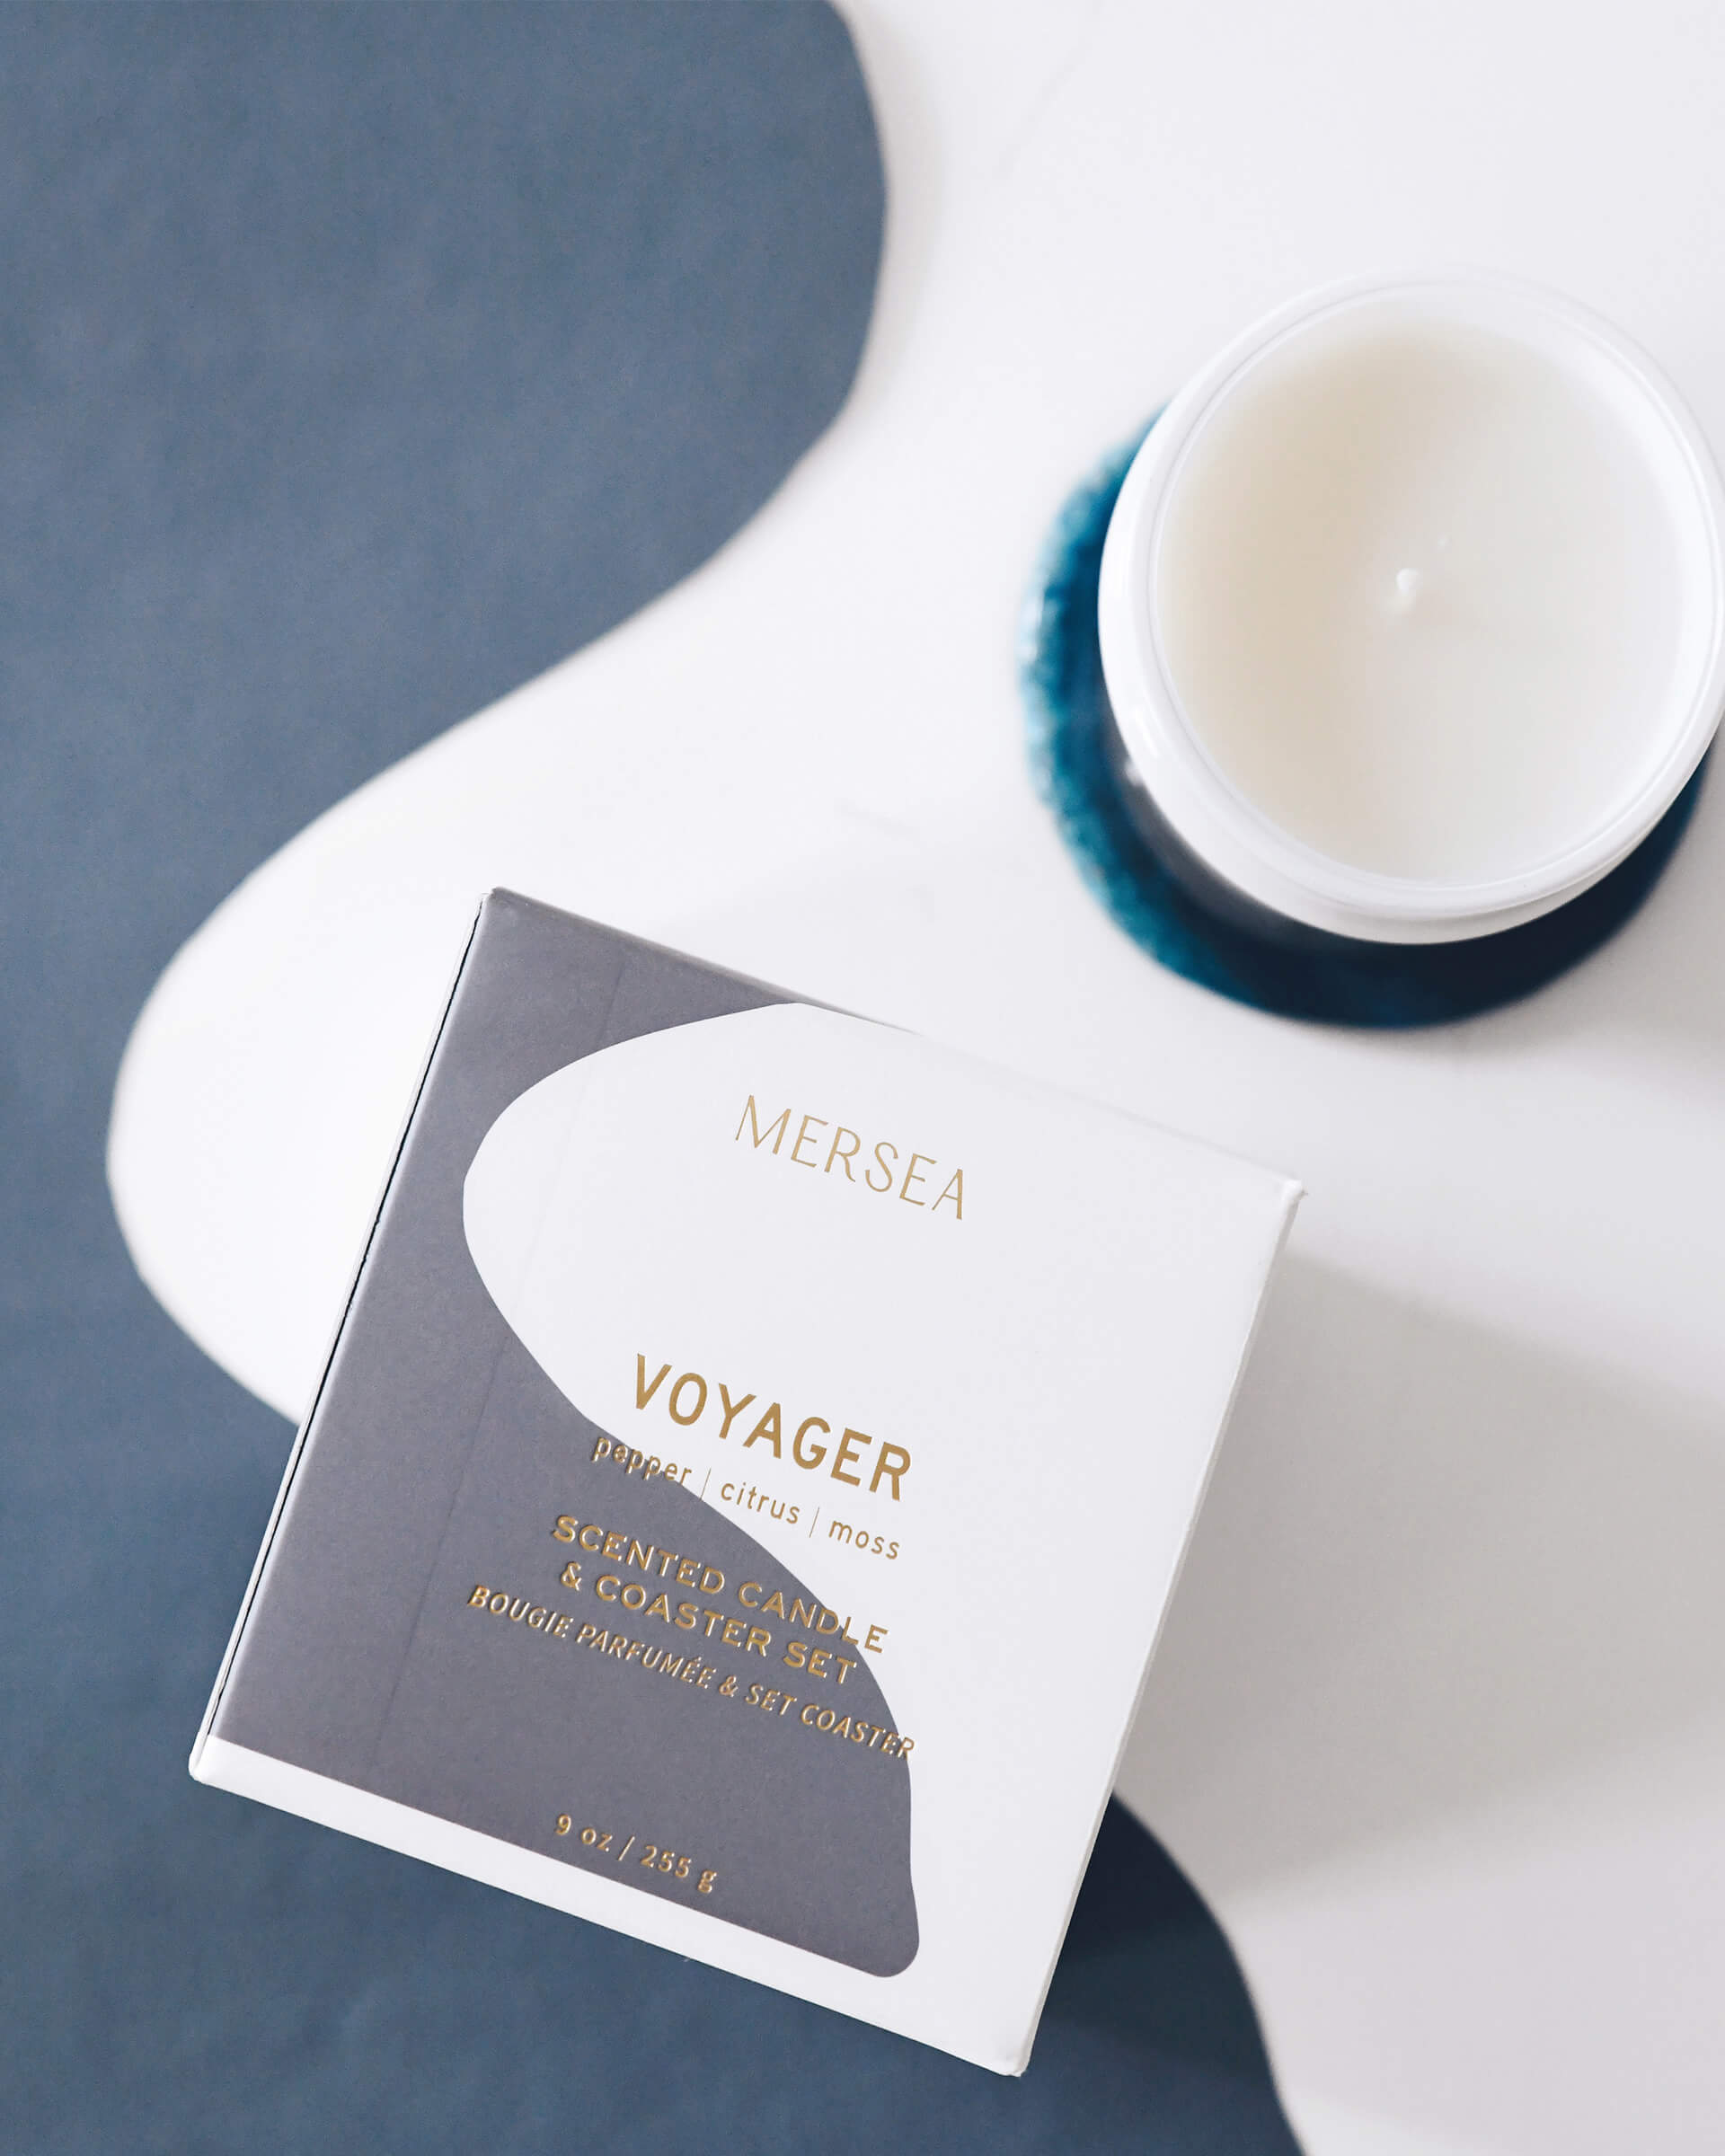 large 9 oz boxed and white voyager candle sitting on blue coaster on white and grey background